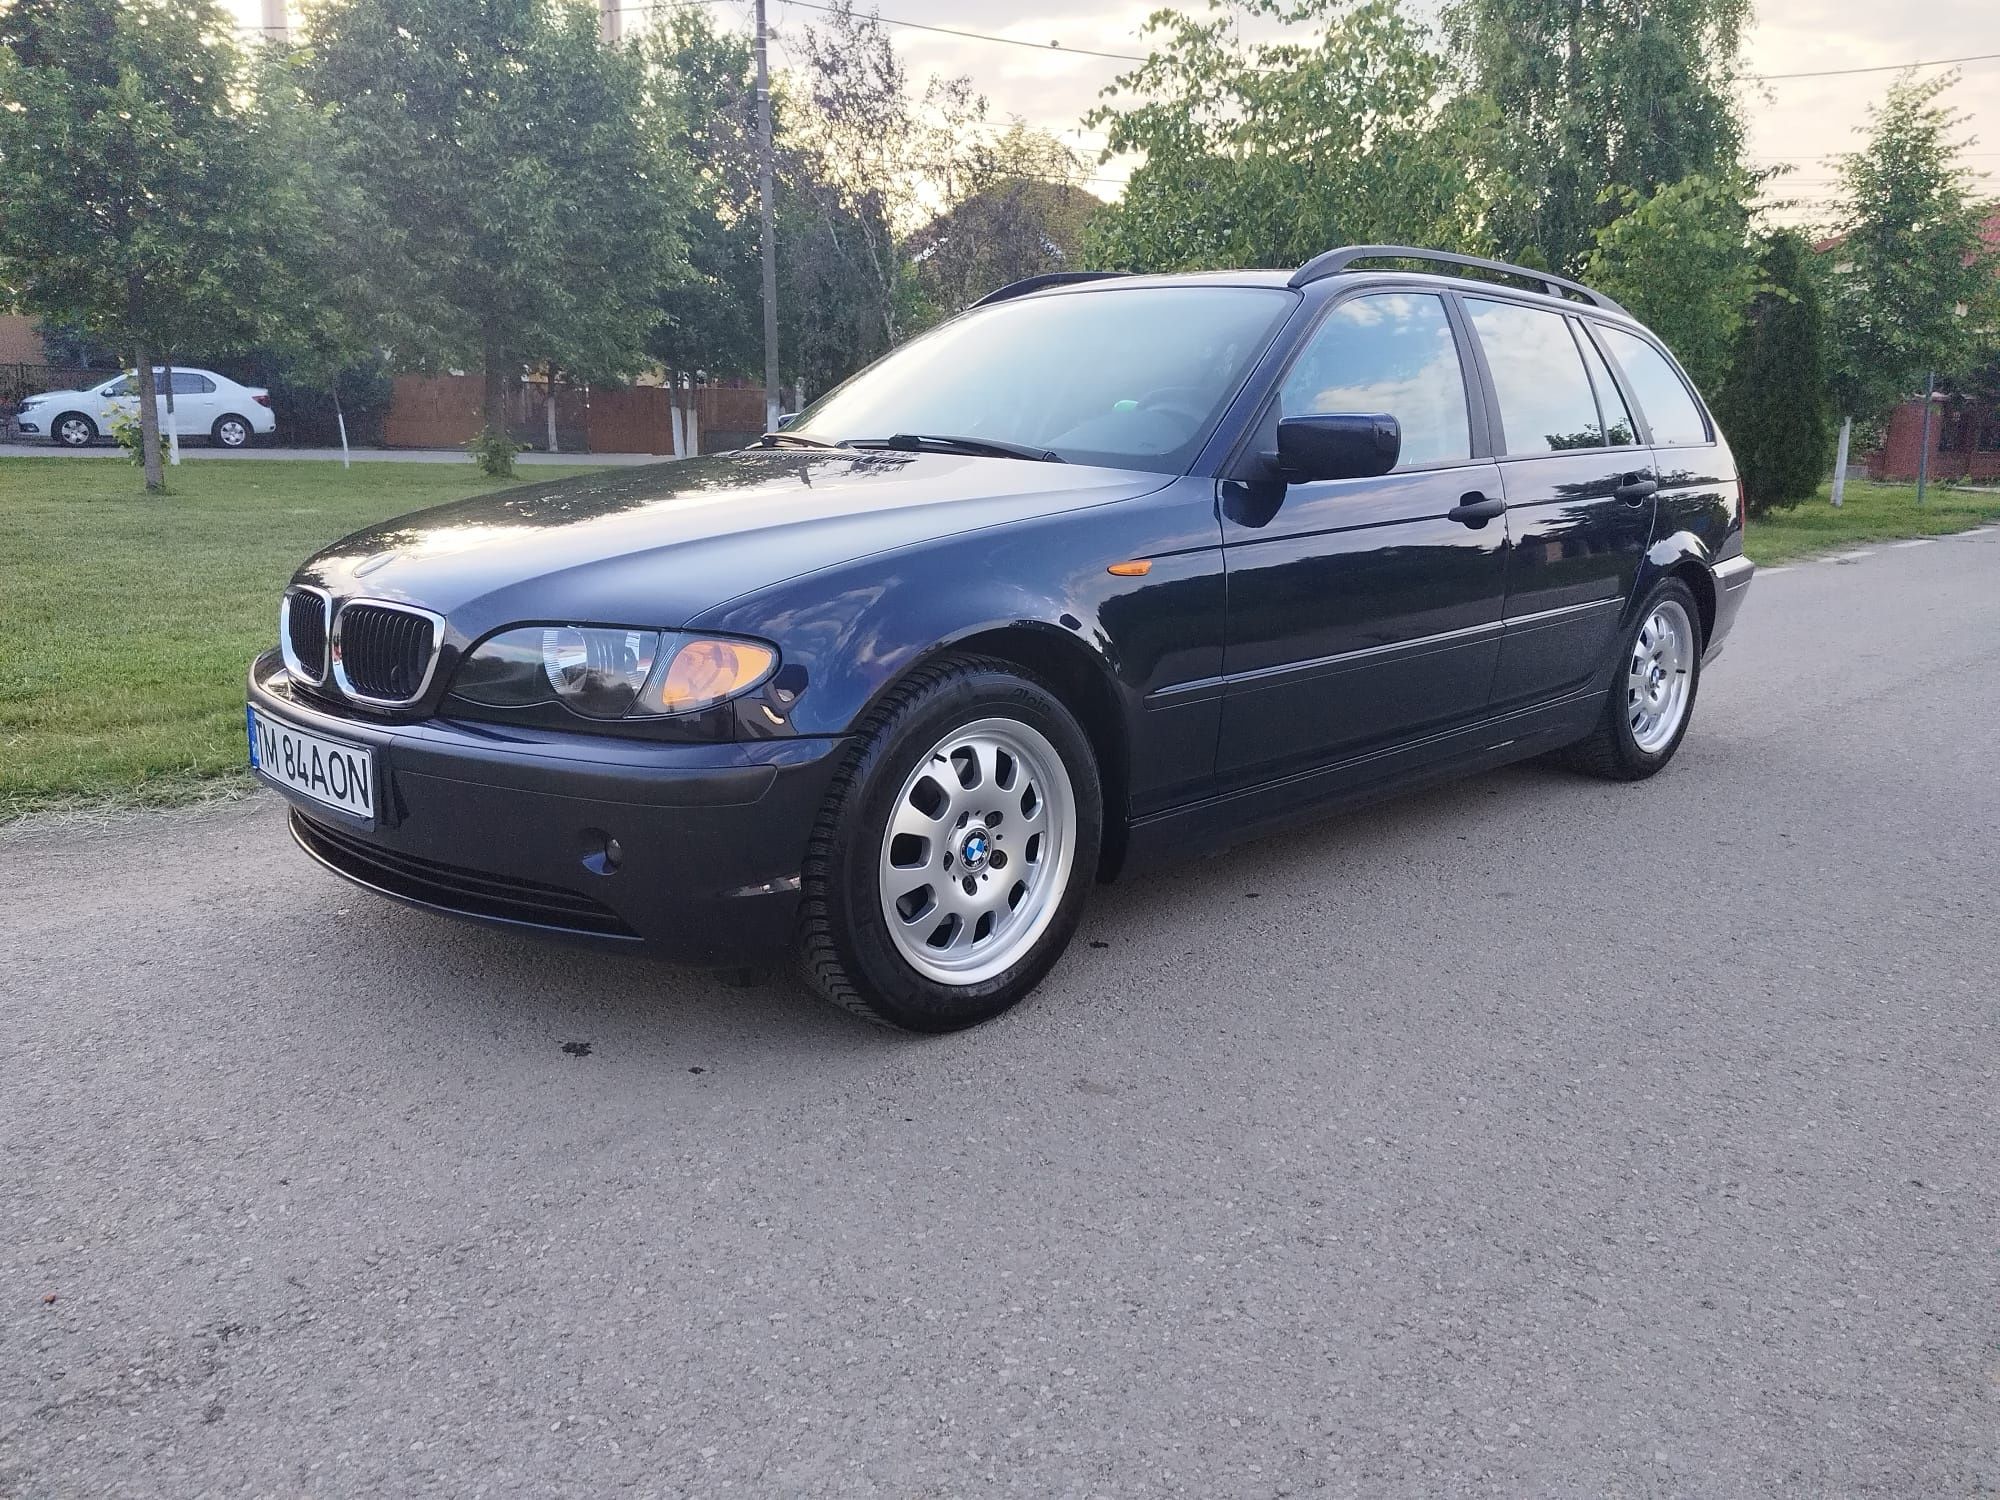 BMW 318i facelift cu 143 cp, an 2004, climatronic,trapa,central